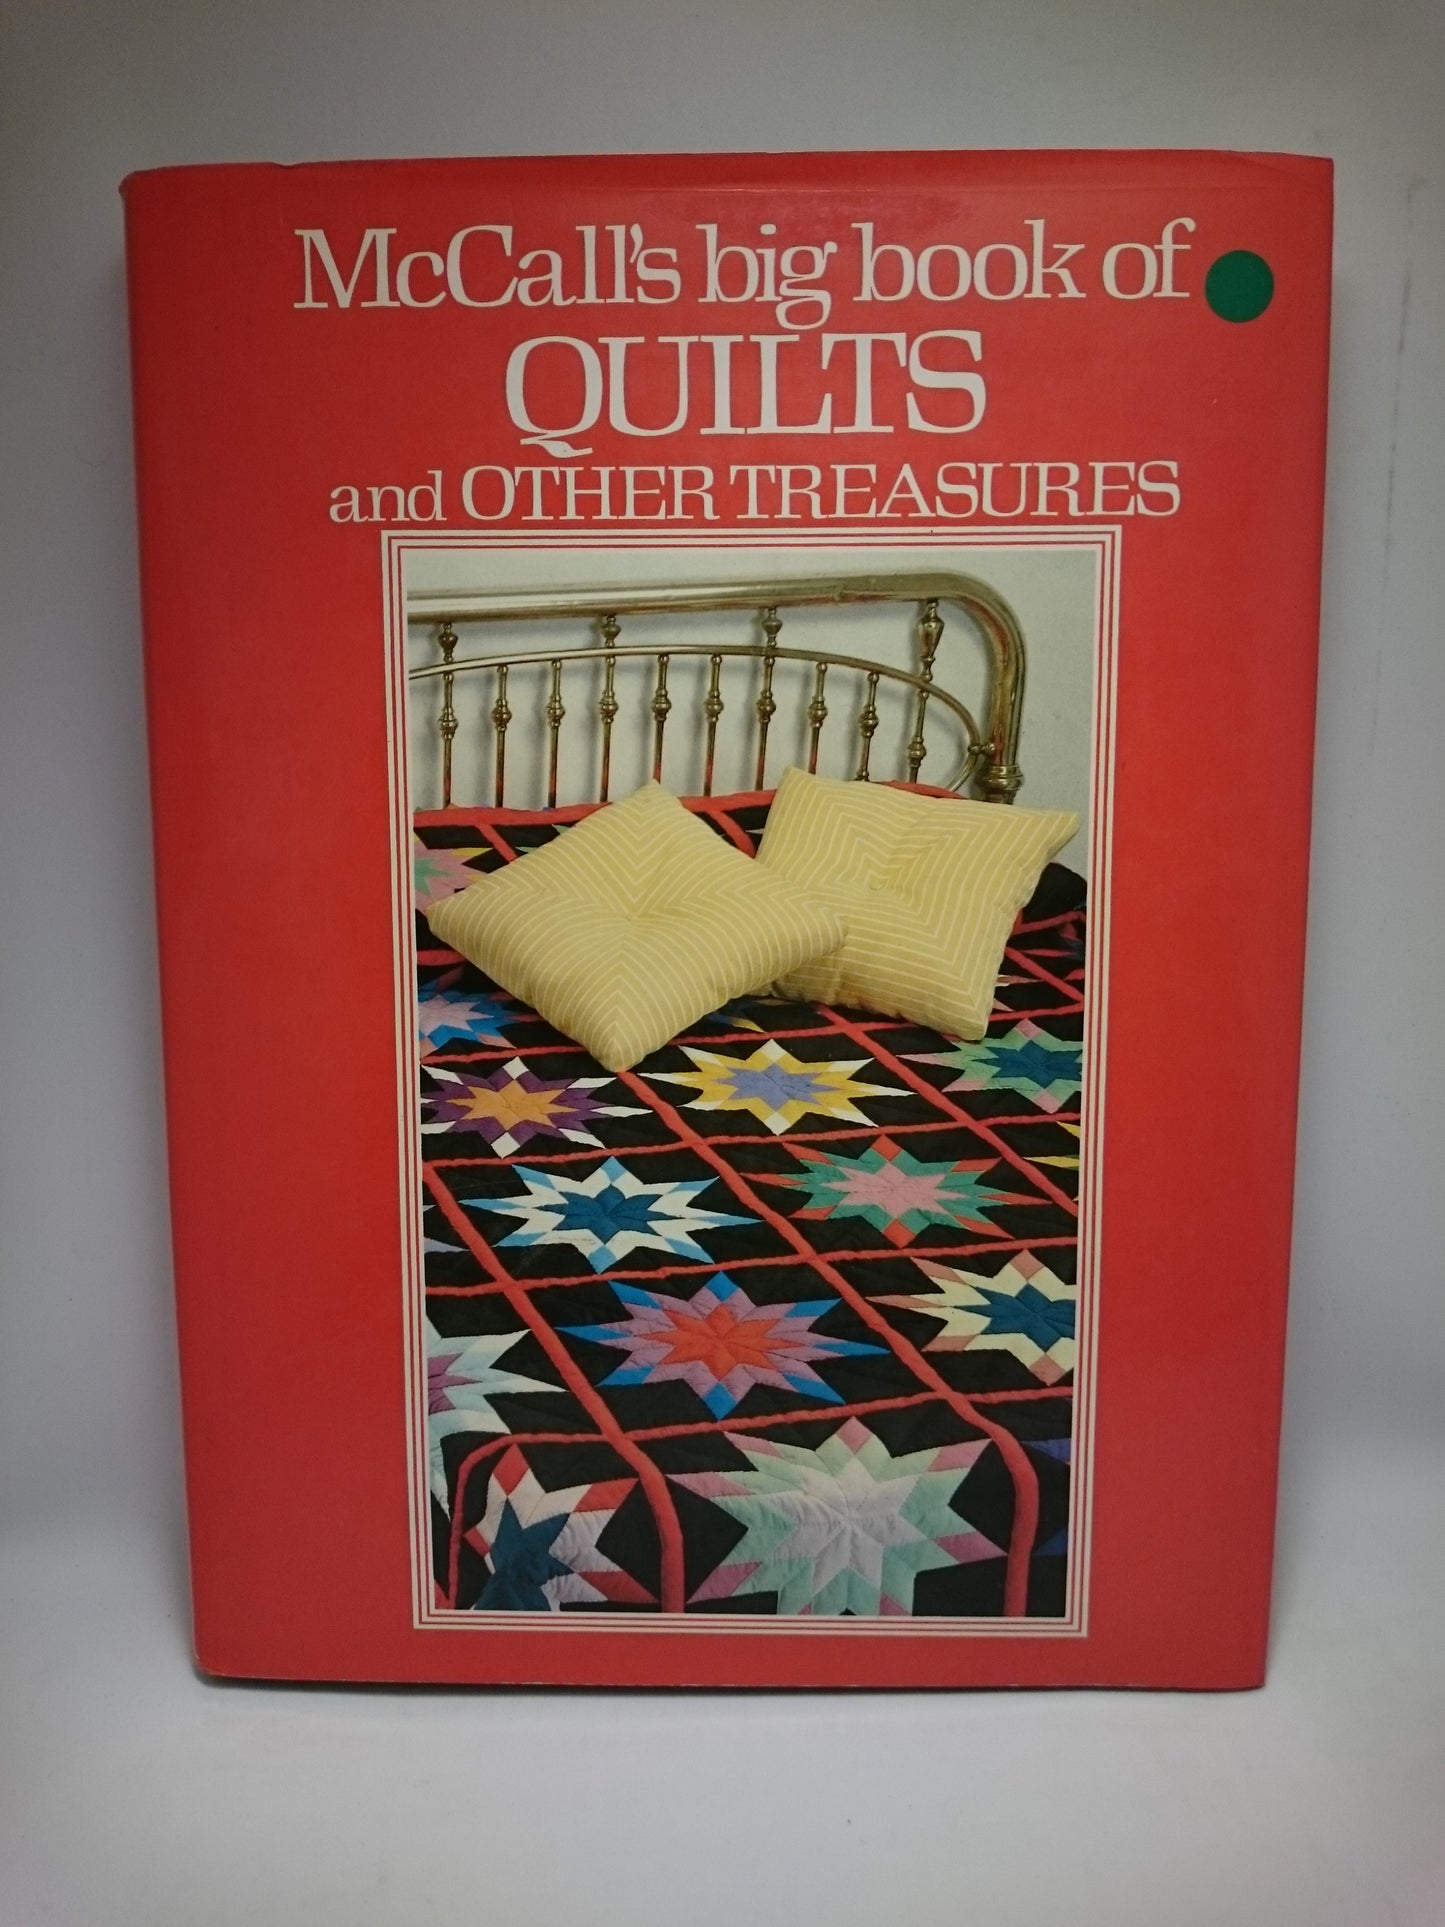 McCall's Big Book of Quilts and Other Treasures